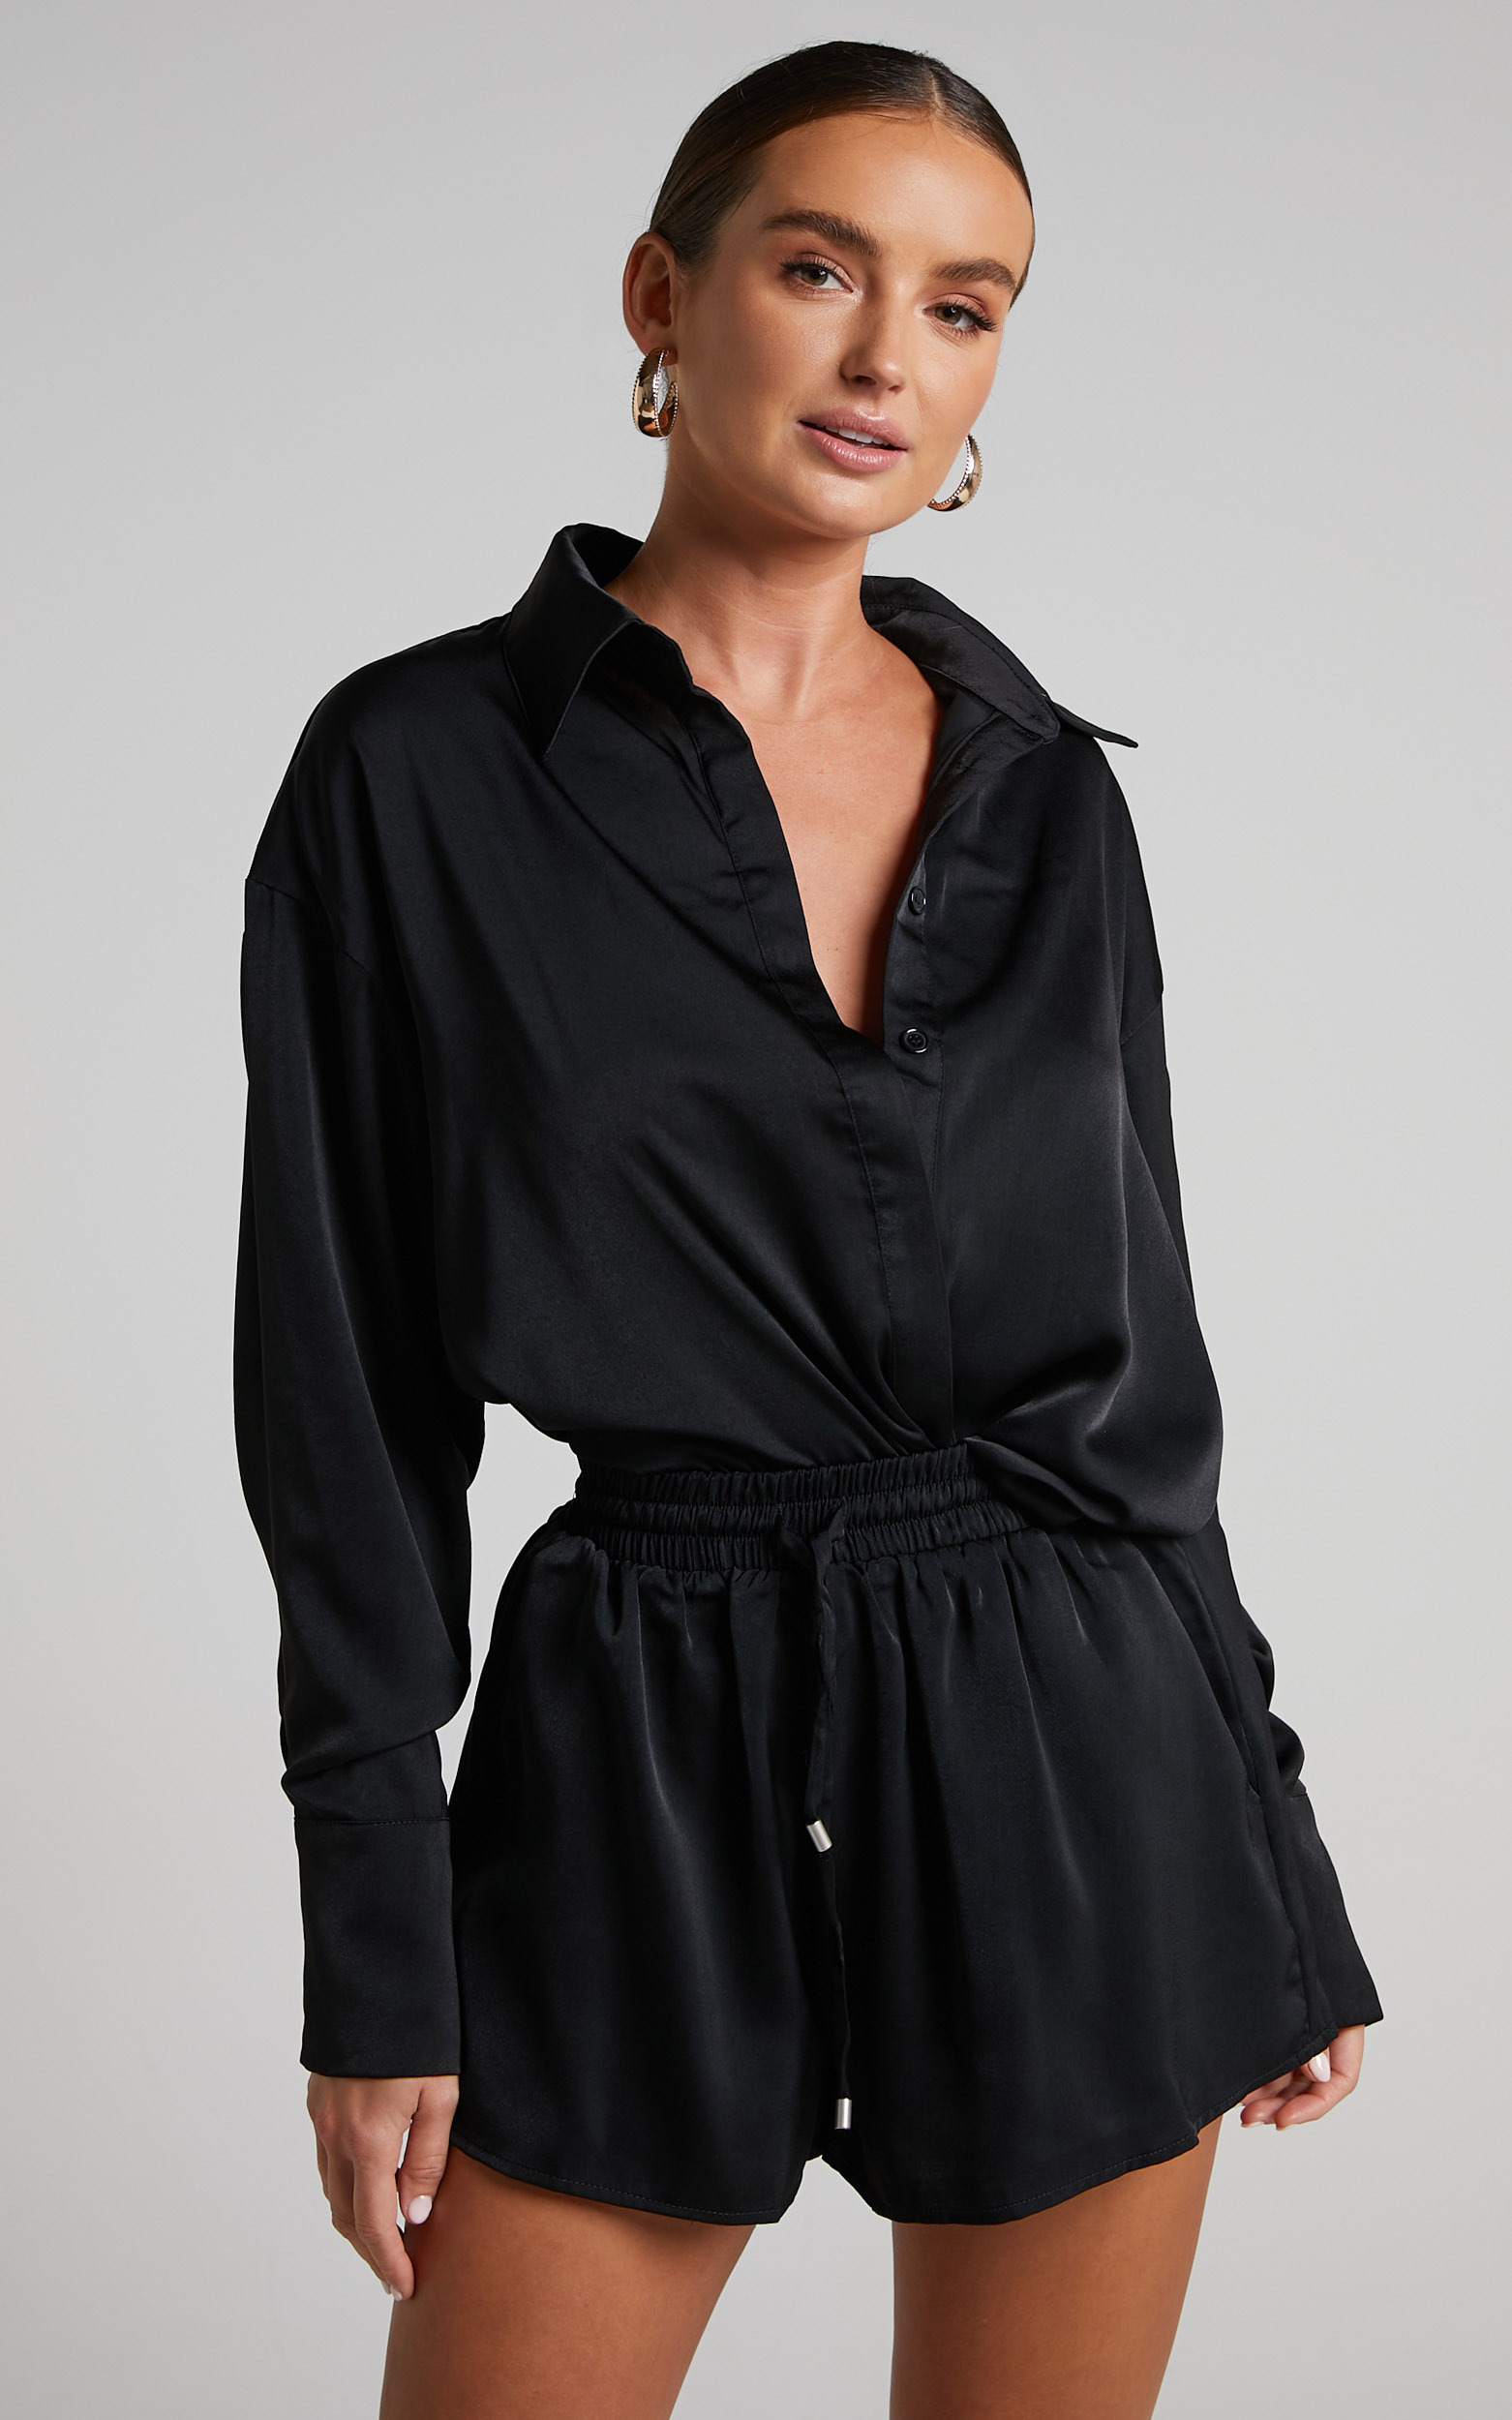 Azurine Oversized Button Up Satin Shirt in Black - 06, BLK1, hi-res image number null